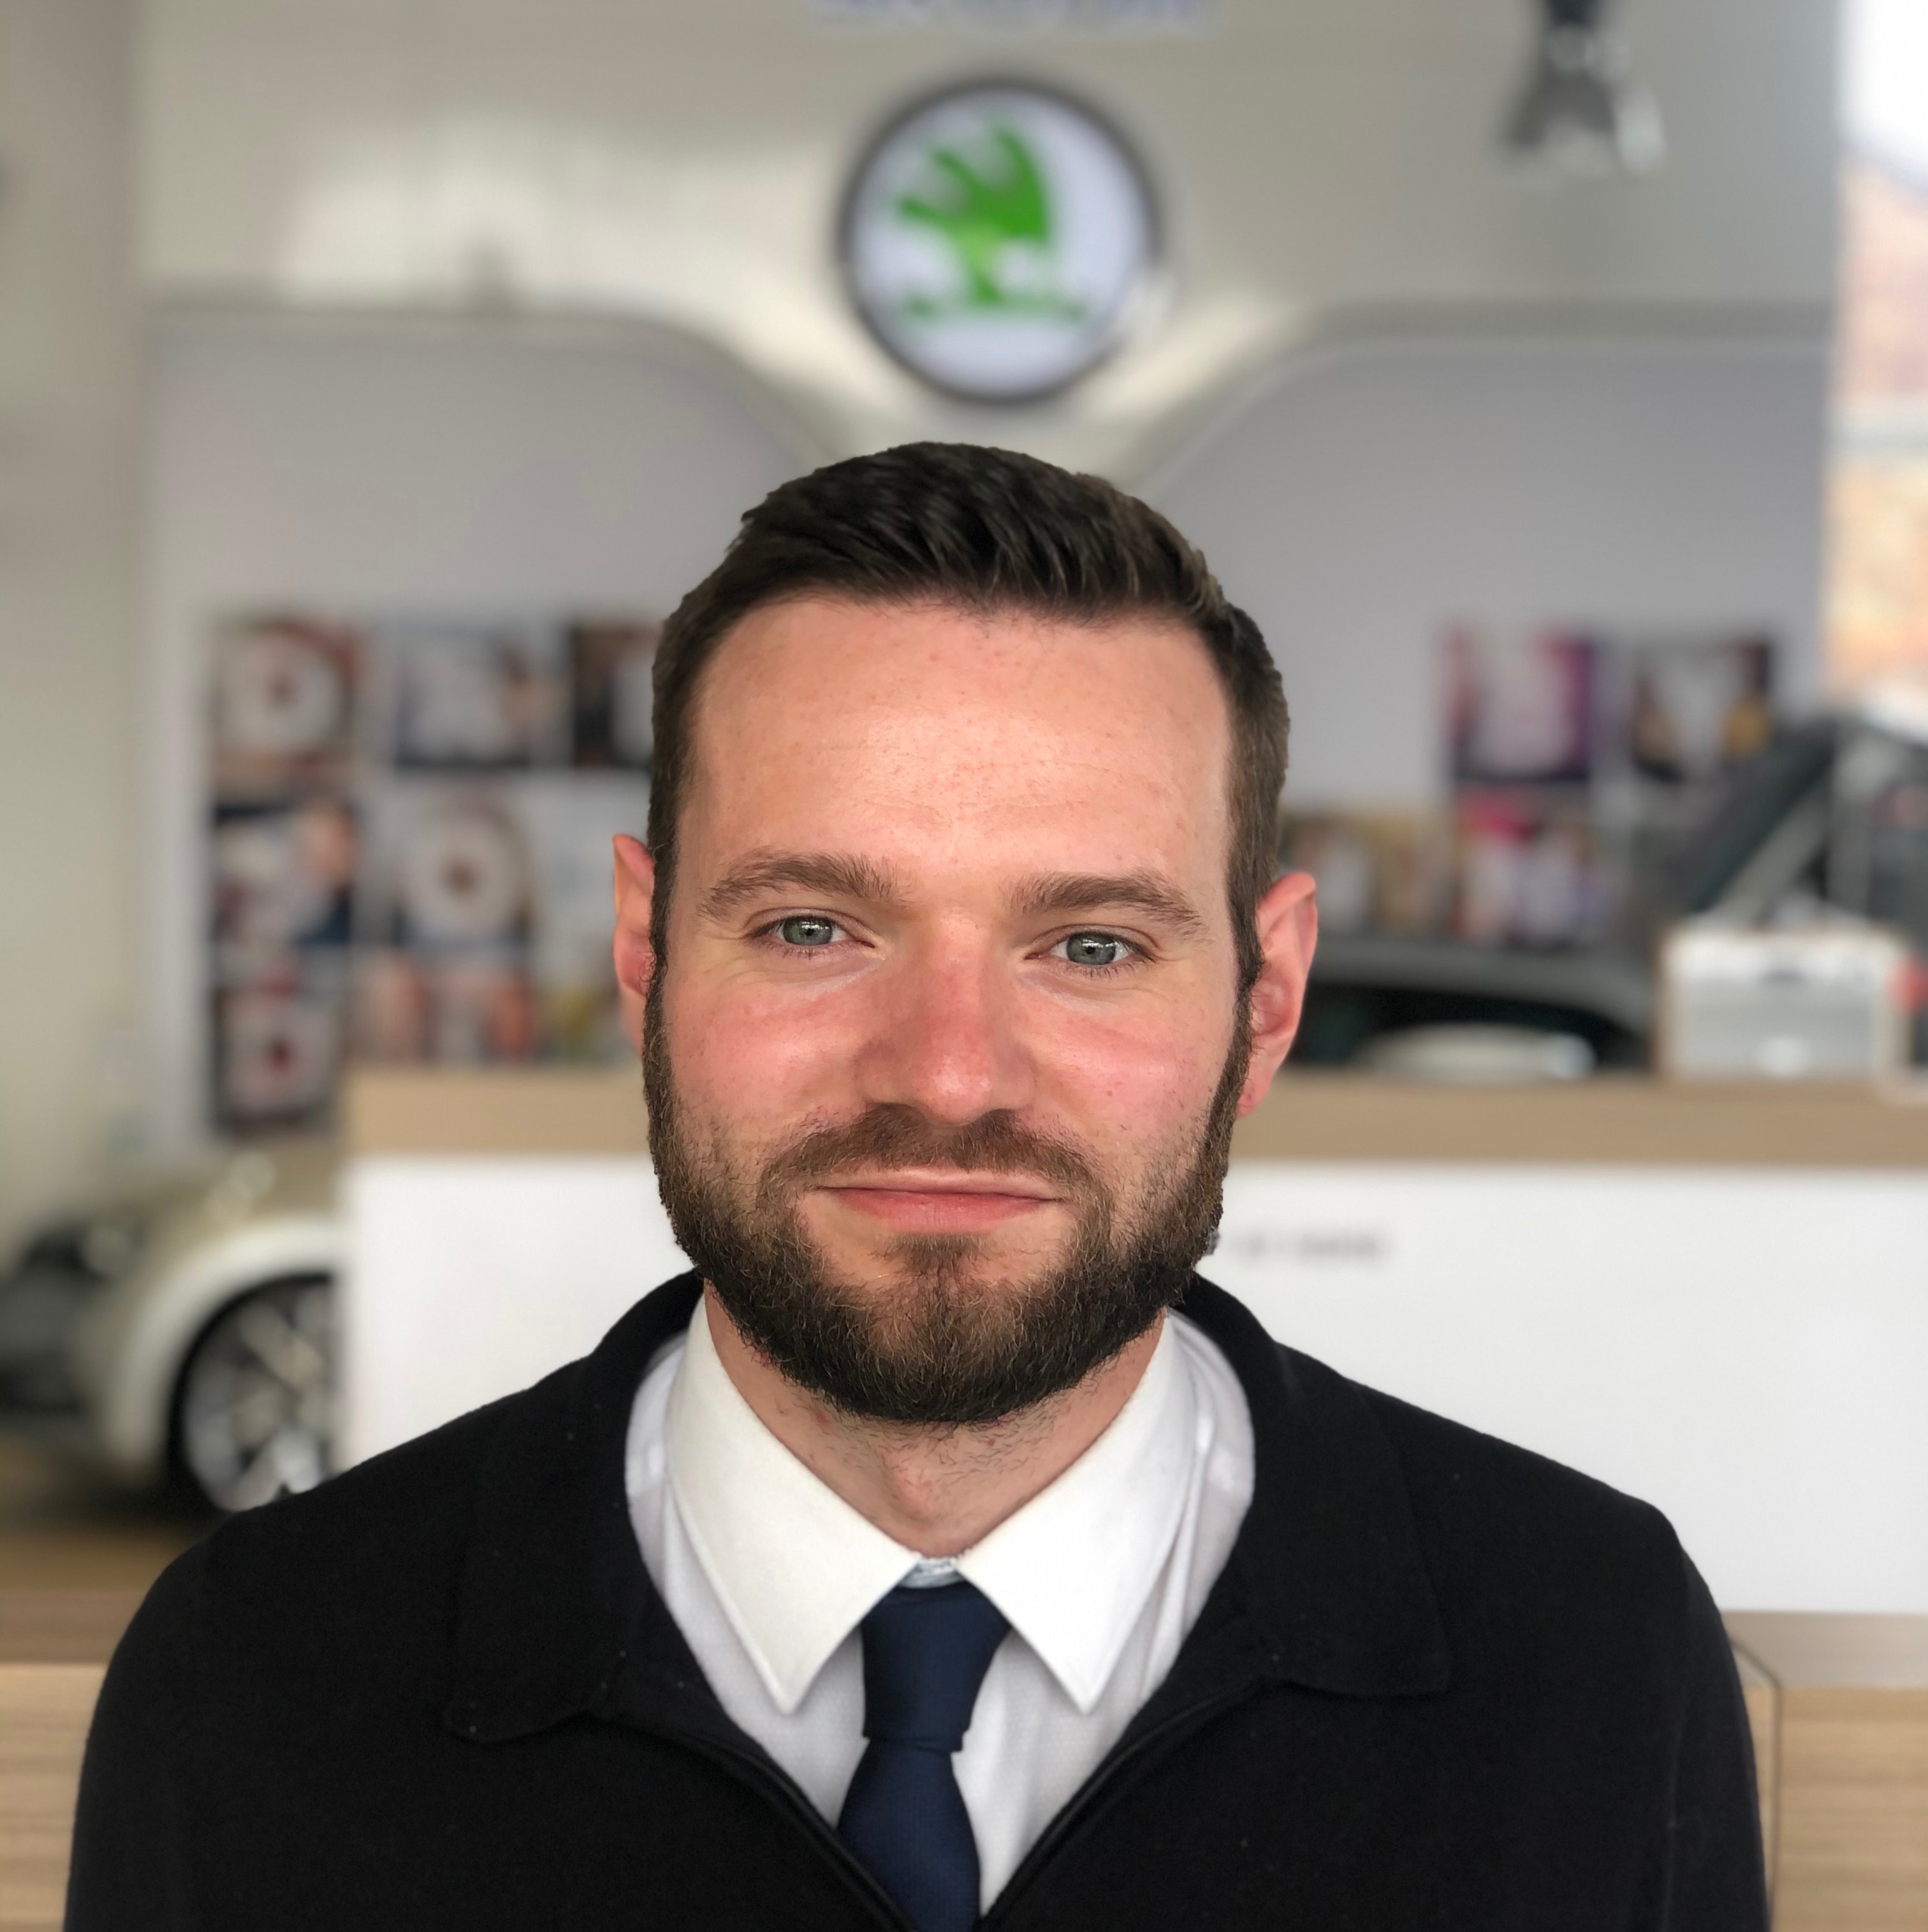 Philip Joins The Sales Team